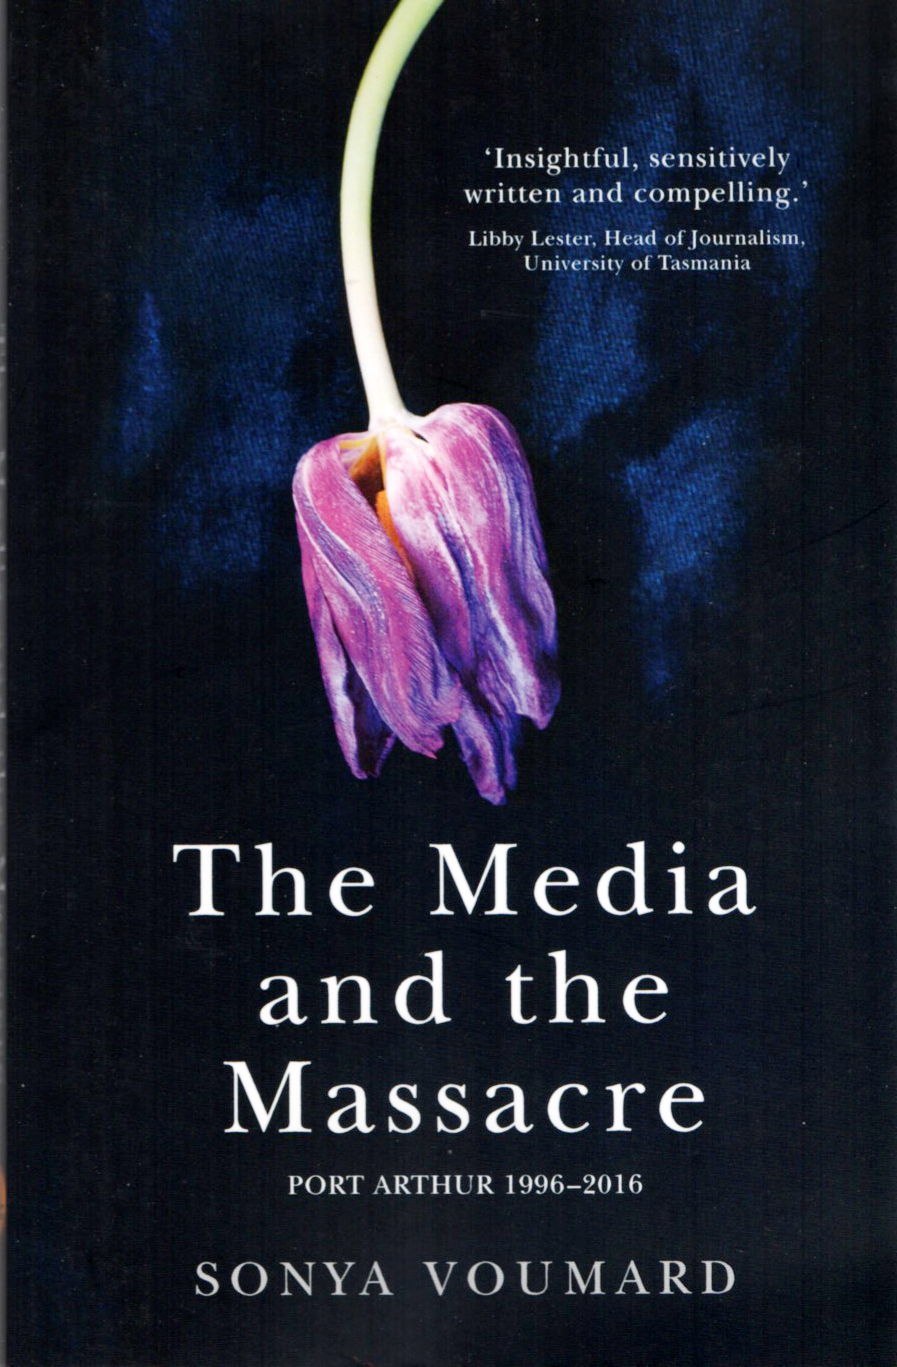 The Media and the Massacre